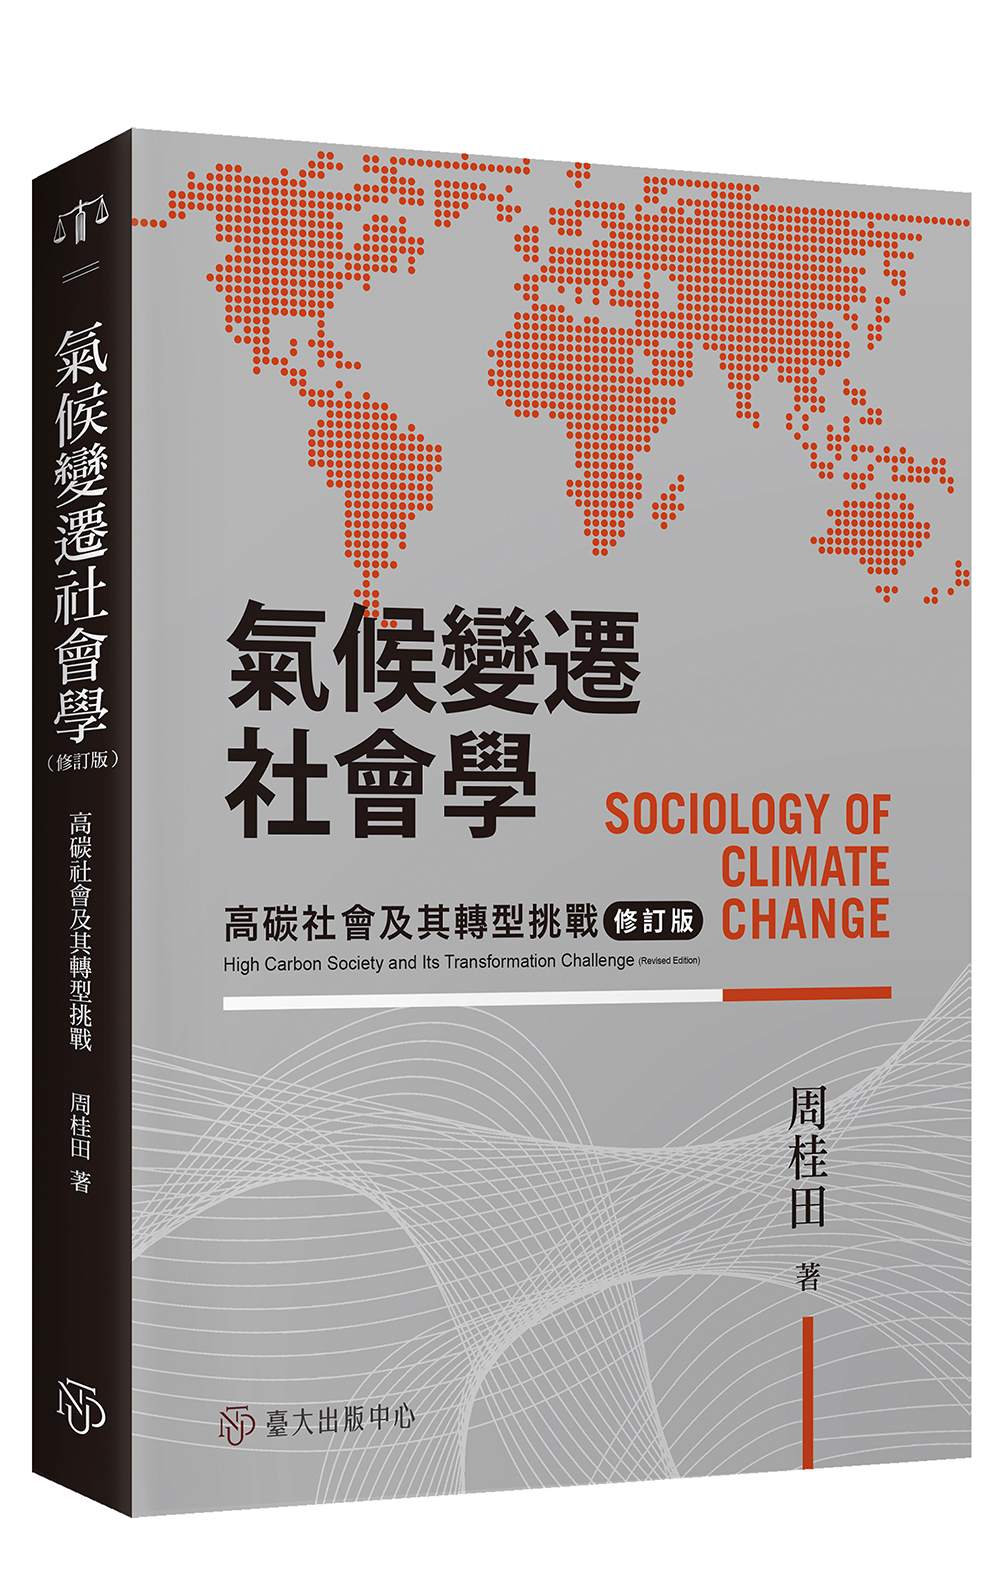 Sociology of Climate Change: High Carbon Society and its transformation challenge (Revised Edition)